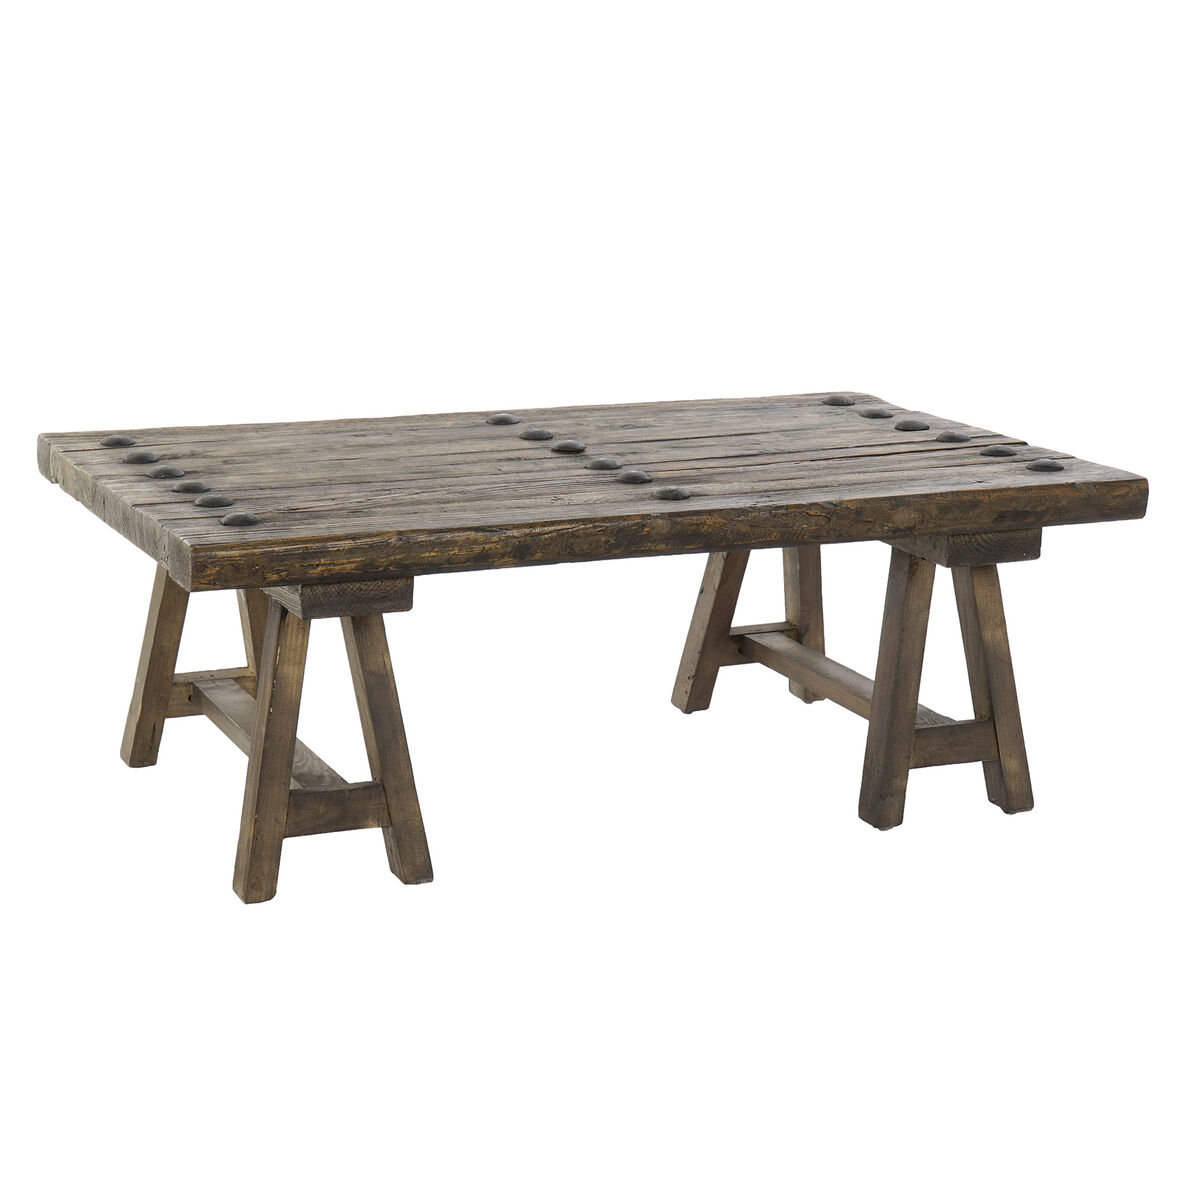 Table d'appoint DKD Home Decor Orme (110 x 70 x 40 cm)